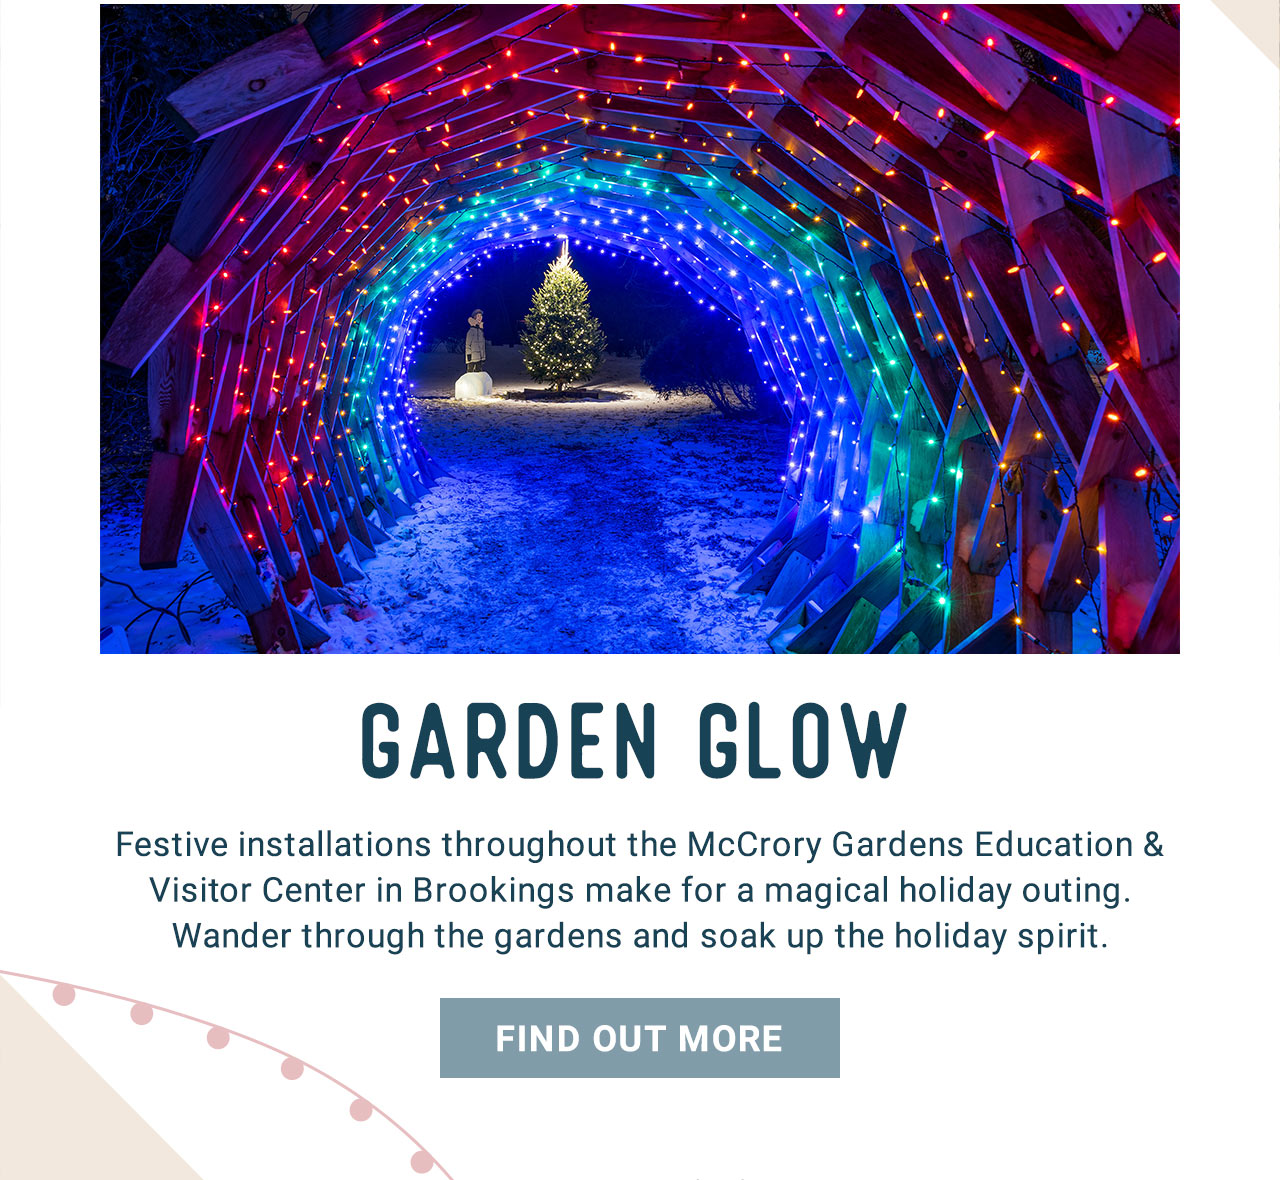 Garden Glow - Find Out More